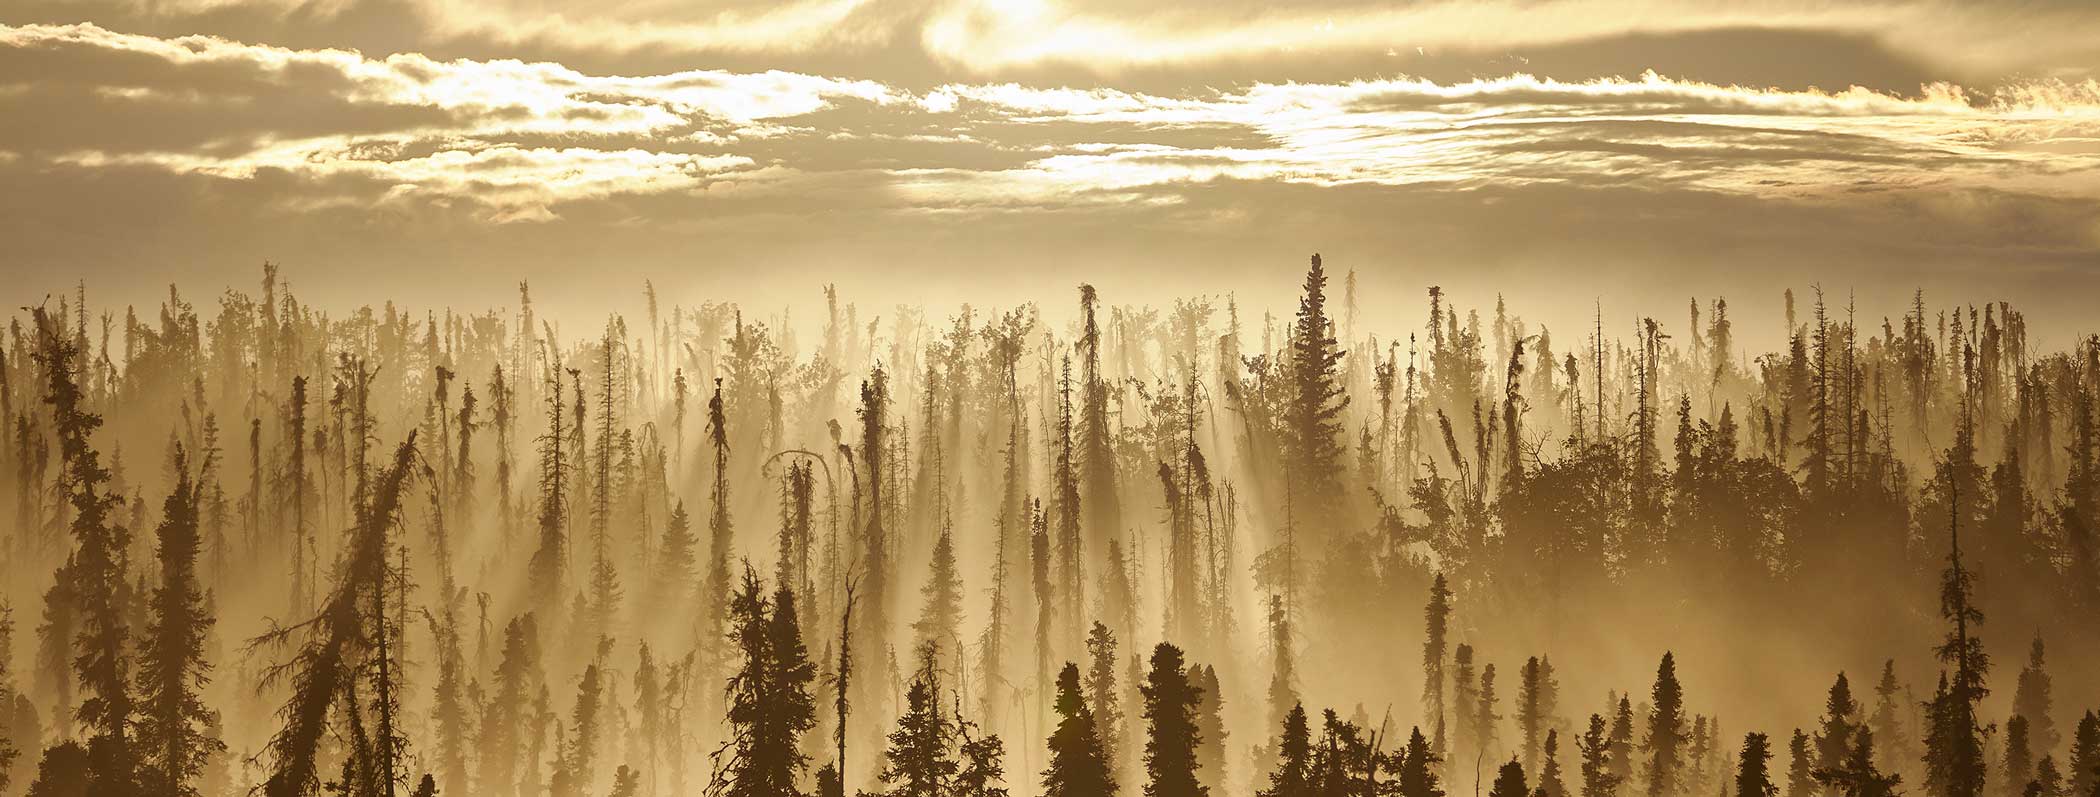 smoke in a boreal forest of burned spruce trees